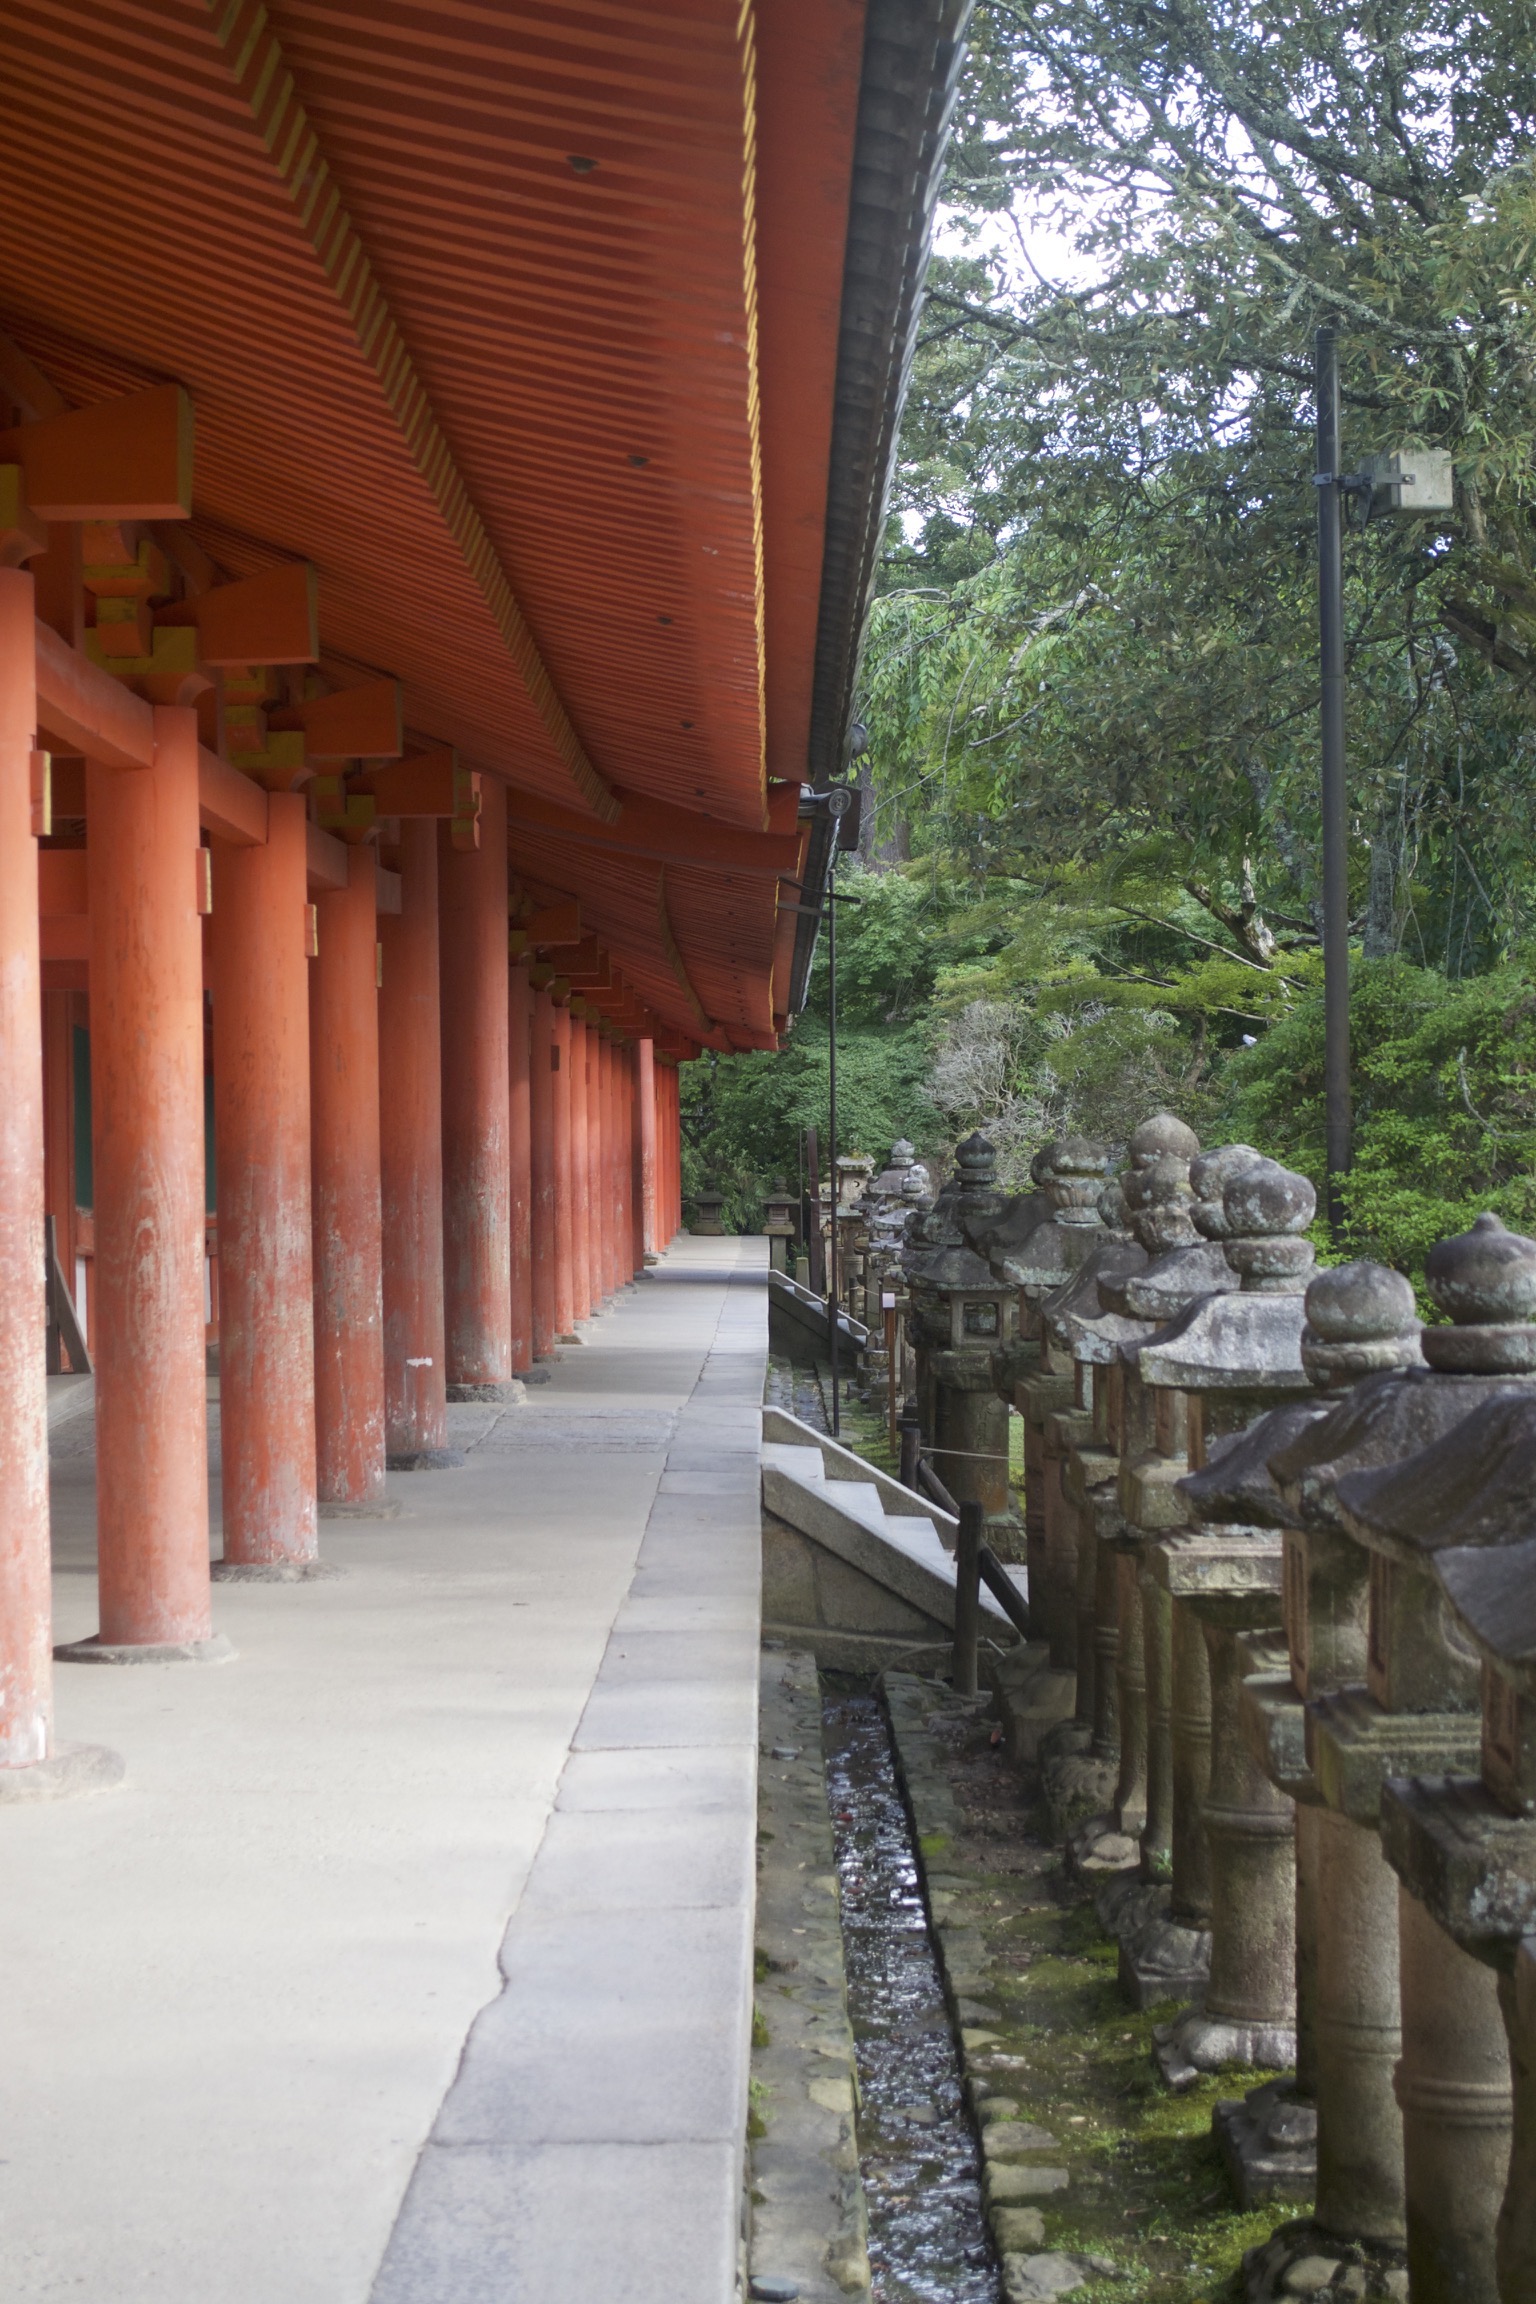 In the left half of the photograph, red wooden columns support a red roof.  In the right half stand a row of small shrines and trees.